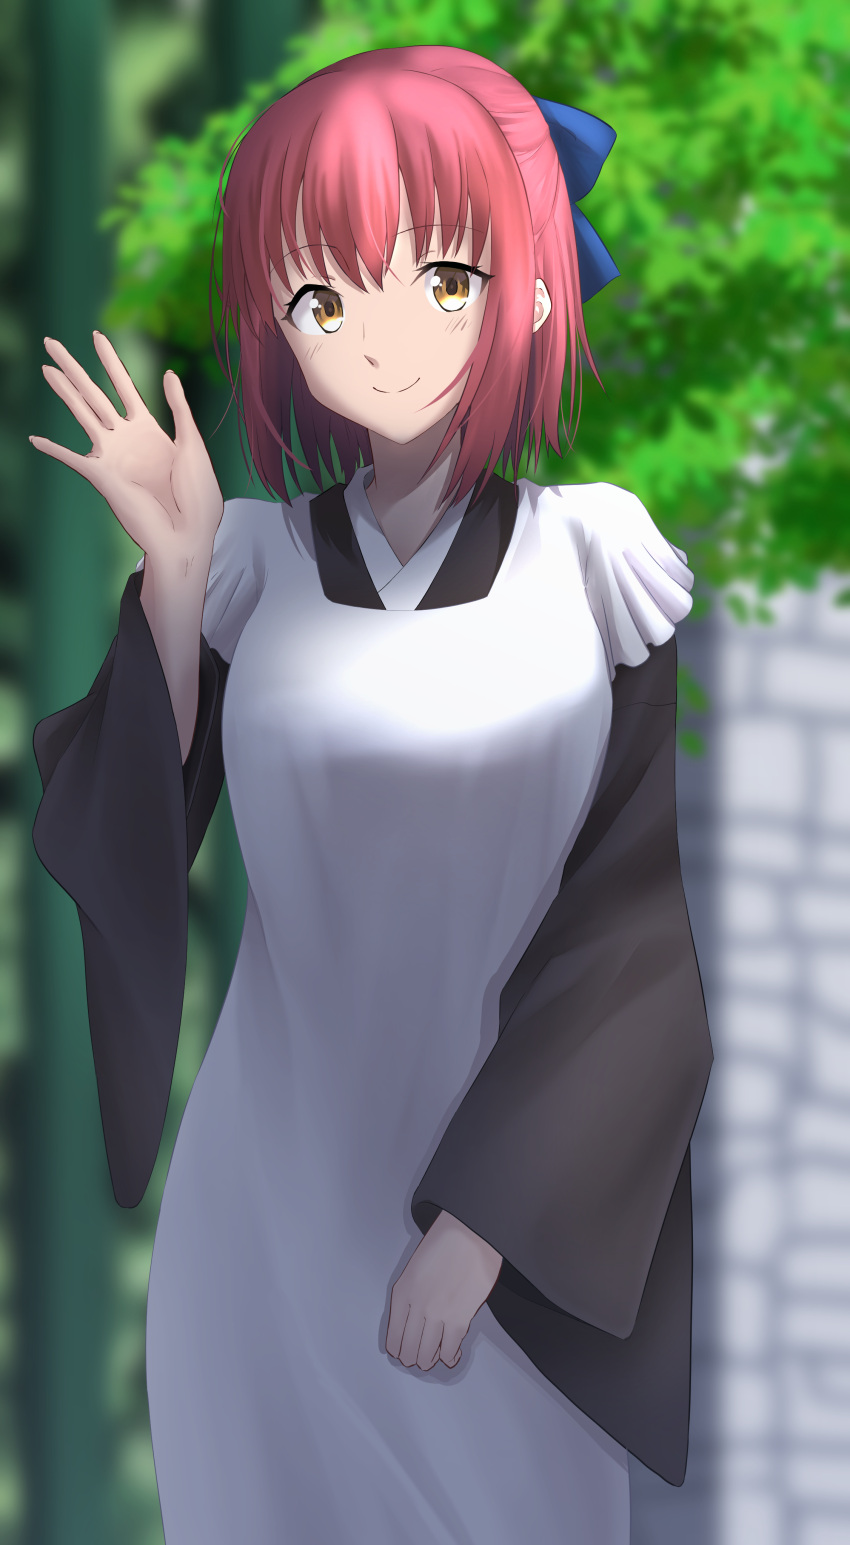 1girl absurdres apron bangs black_kimono blue_bow blurry blurry_background blush bow closed_mouth commentary_request eyebrows_visible_through_hair hair_between_eyes hair_bow half_updo highres japanese_clothes kimono kohaku_(tsukihime) kyou_(kyouillust) looking_at_viewer maid_apron outdoors plant redhead short_hair sidelocks smile solo tsukihime wa_maid white_apron wide_sleeves yellow_eyes